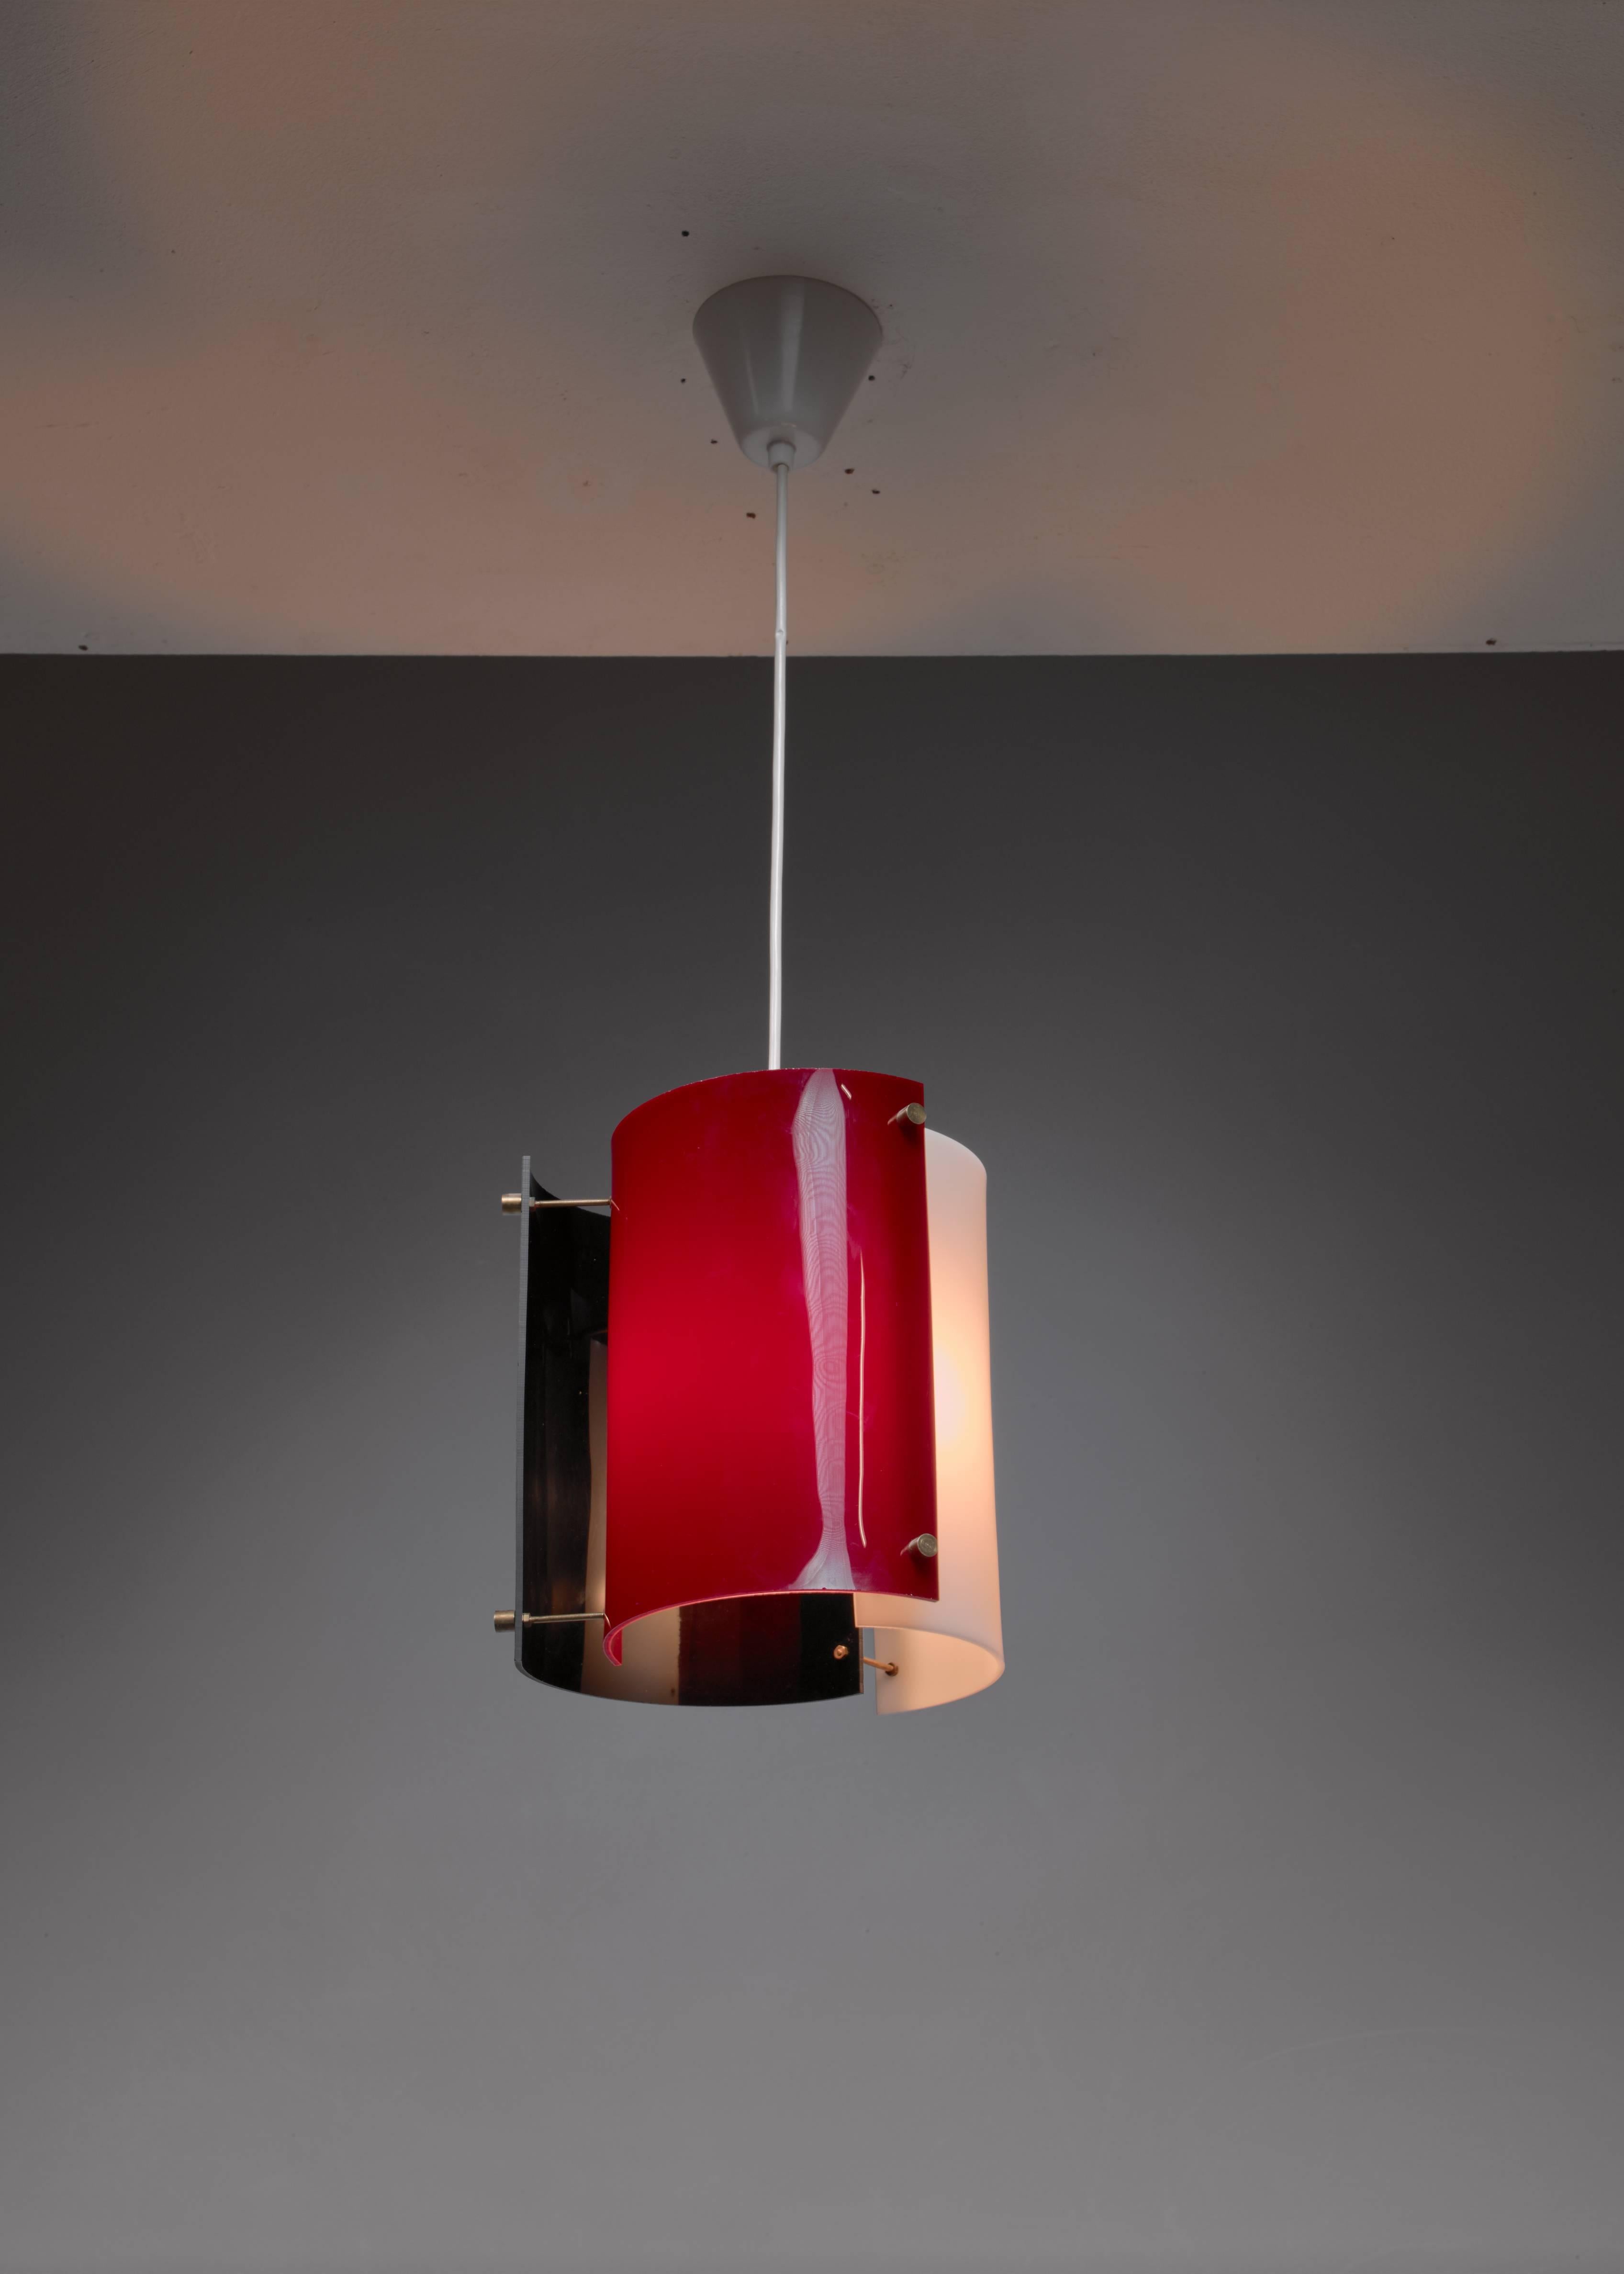 A Yki Nummi 1960s pendant for Orno. The lamp is made of three semicircular plexiglass elements in white, black and purple, held together with thin brass rods. The colored plexiglass creates a beautiful, atmospheric light. A variation with a peach,